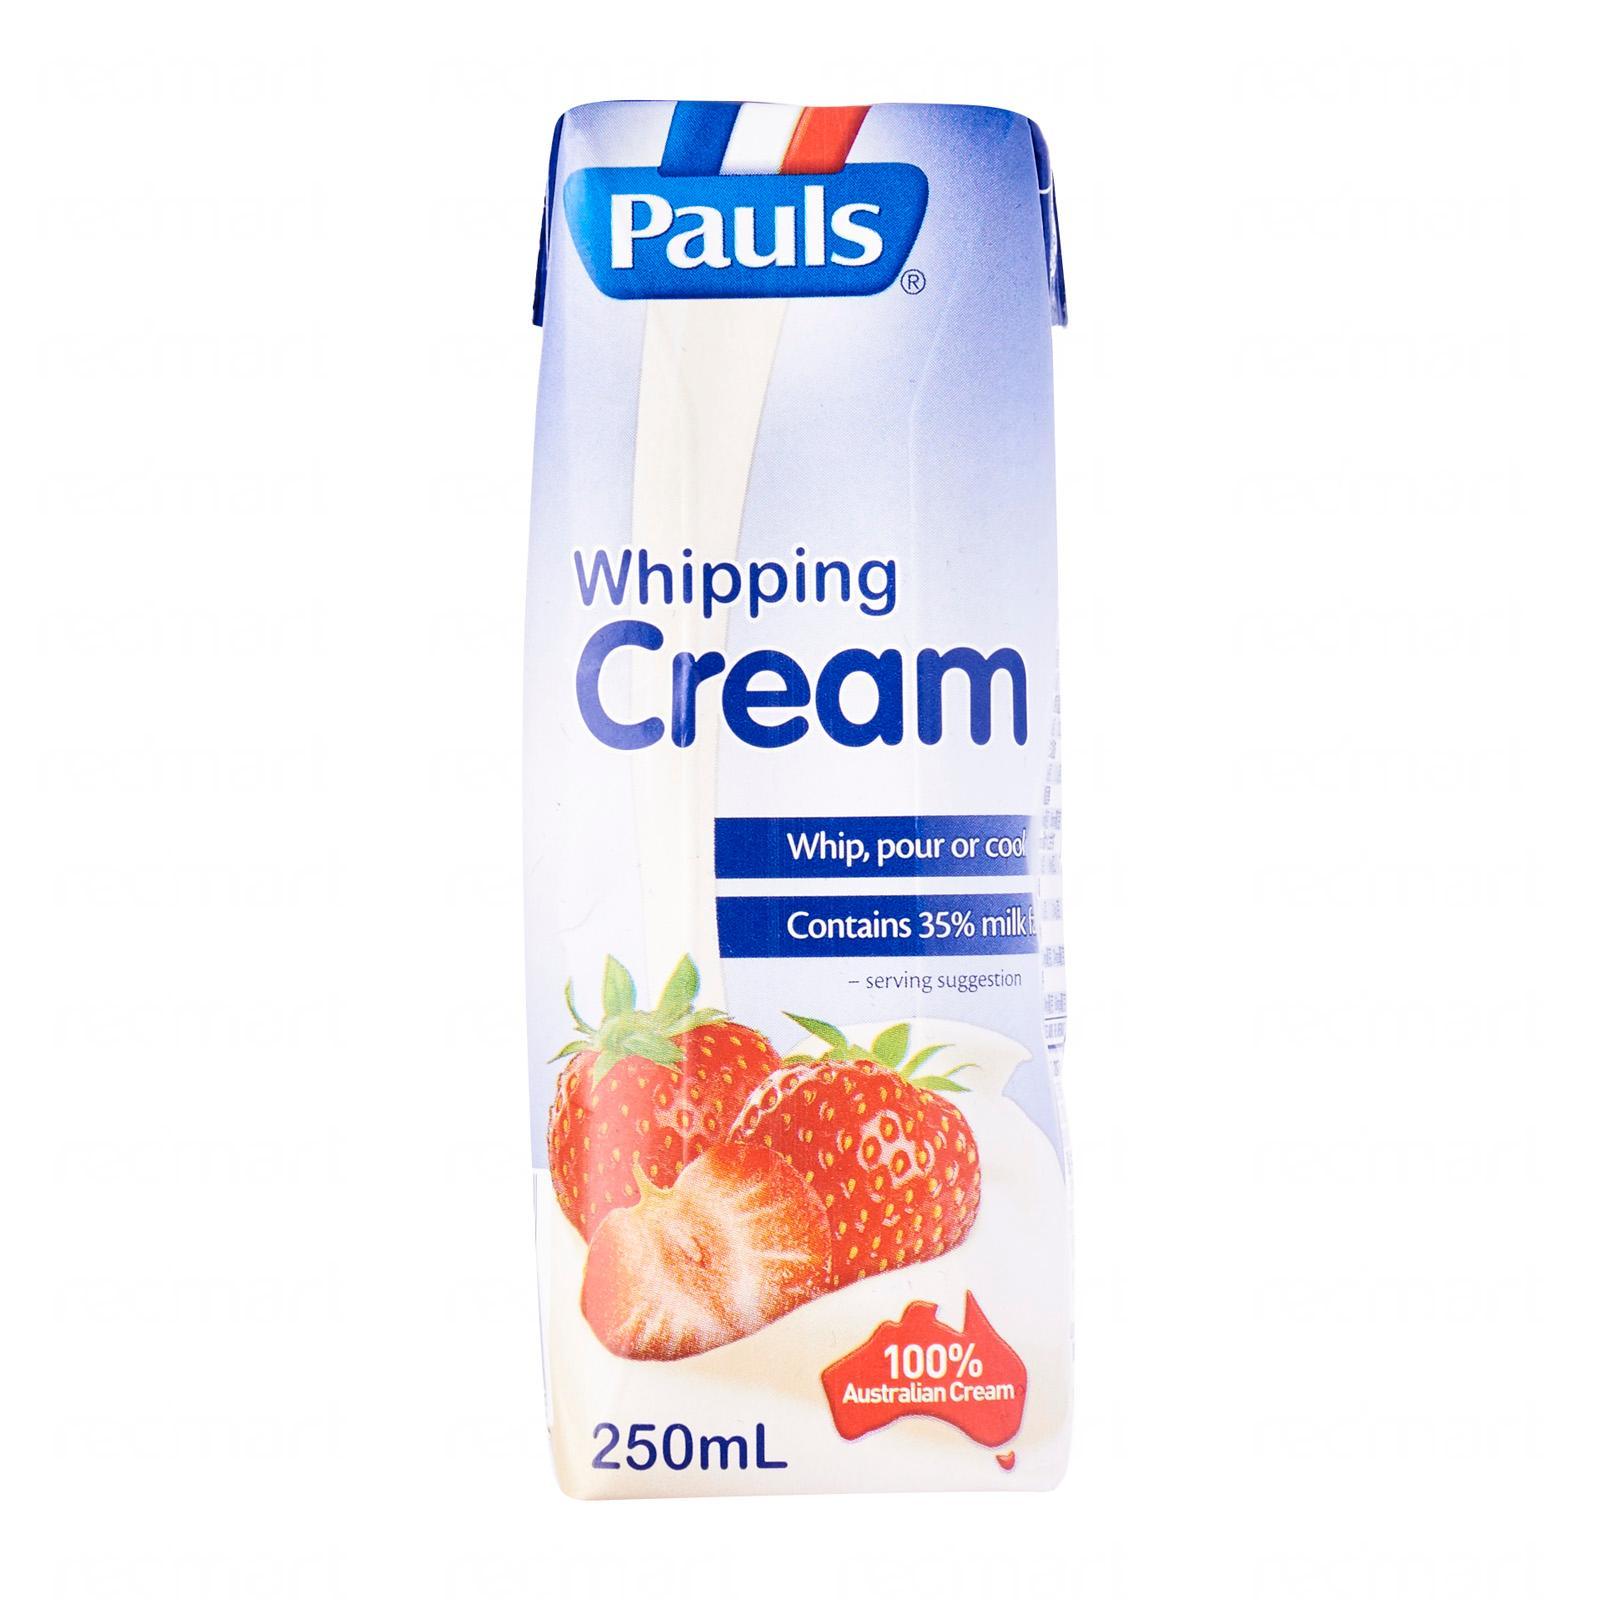 Whipping Cream Buy Whipping Cream At Best Price In Singapore